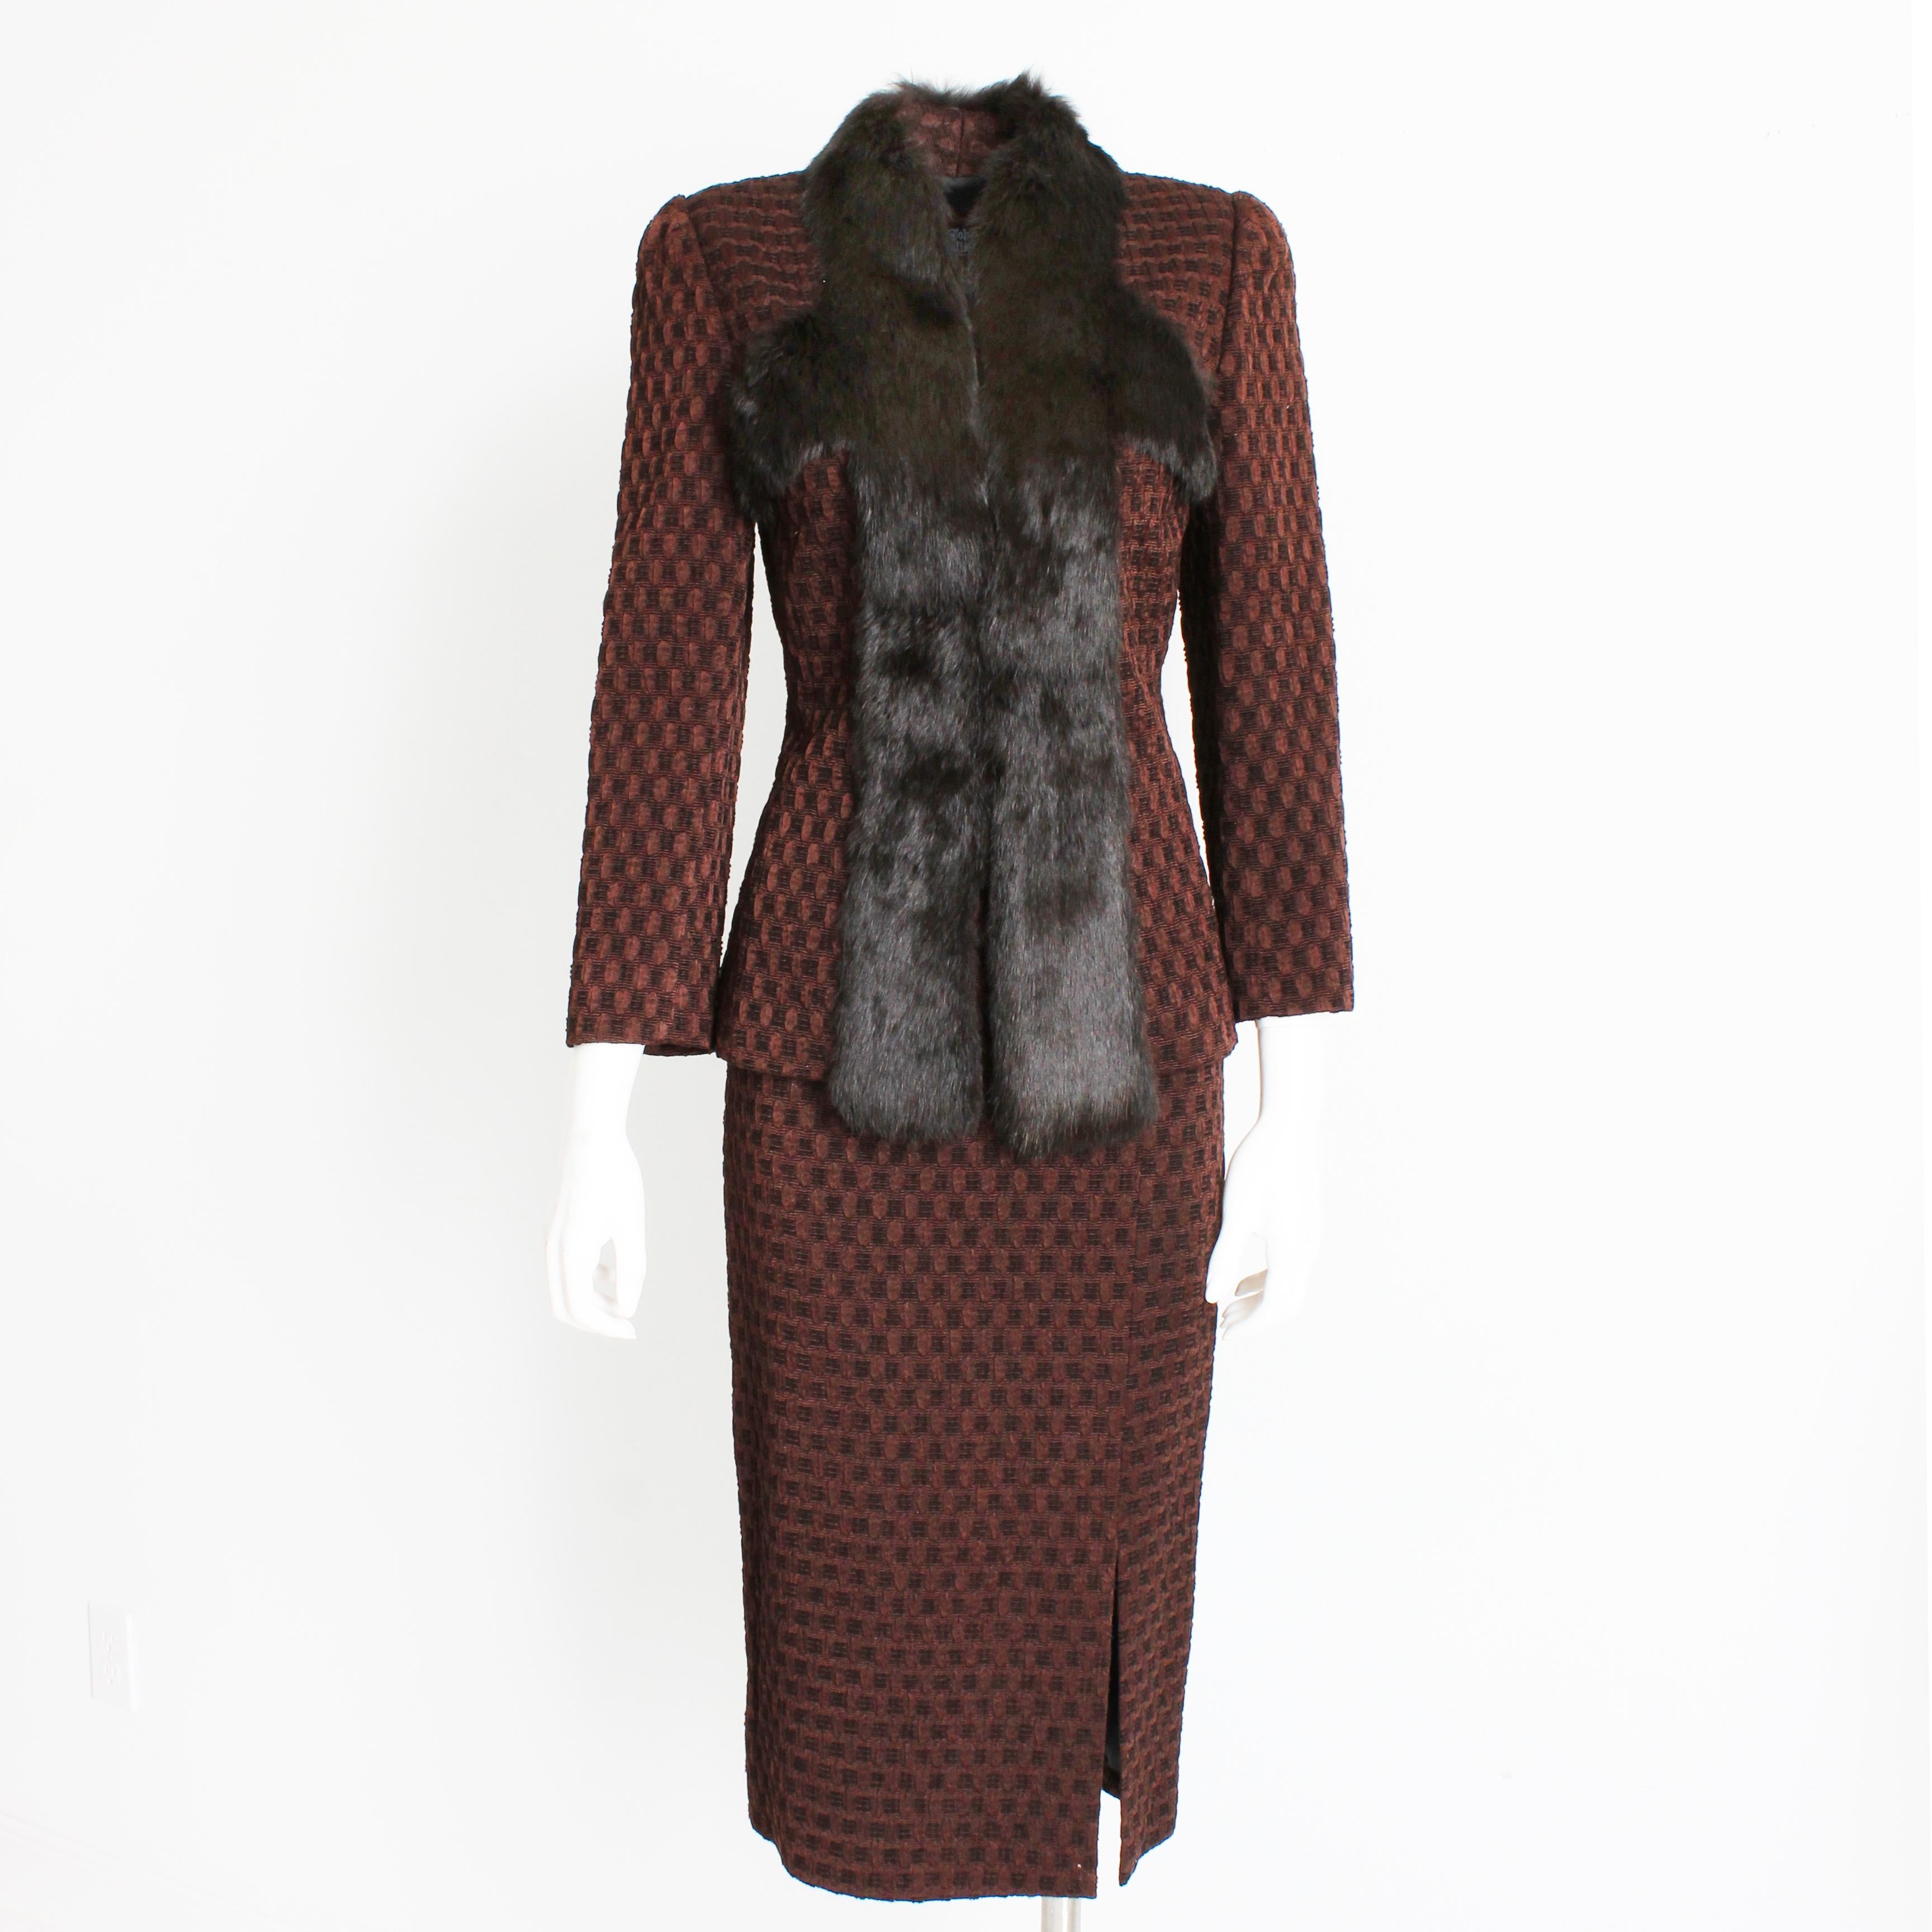 This incredible jacket and skirt ensemble was made by John Galliano, most likely in the late 90s or early 2000s. 

Made from a wonderful textured knit of brown silk and wool, the jacket is fitted and trimmed in supple Rex Rabbit fur.  The skirt